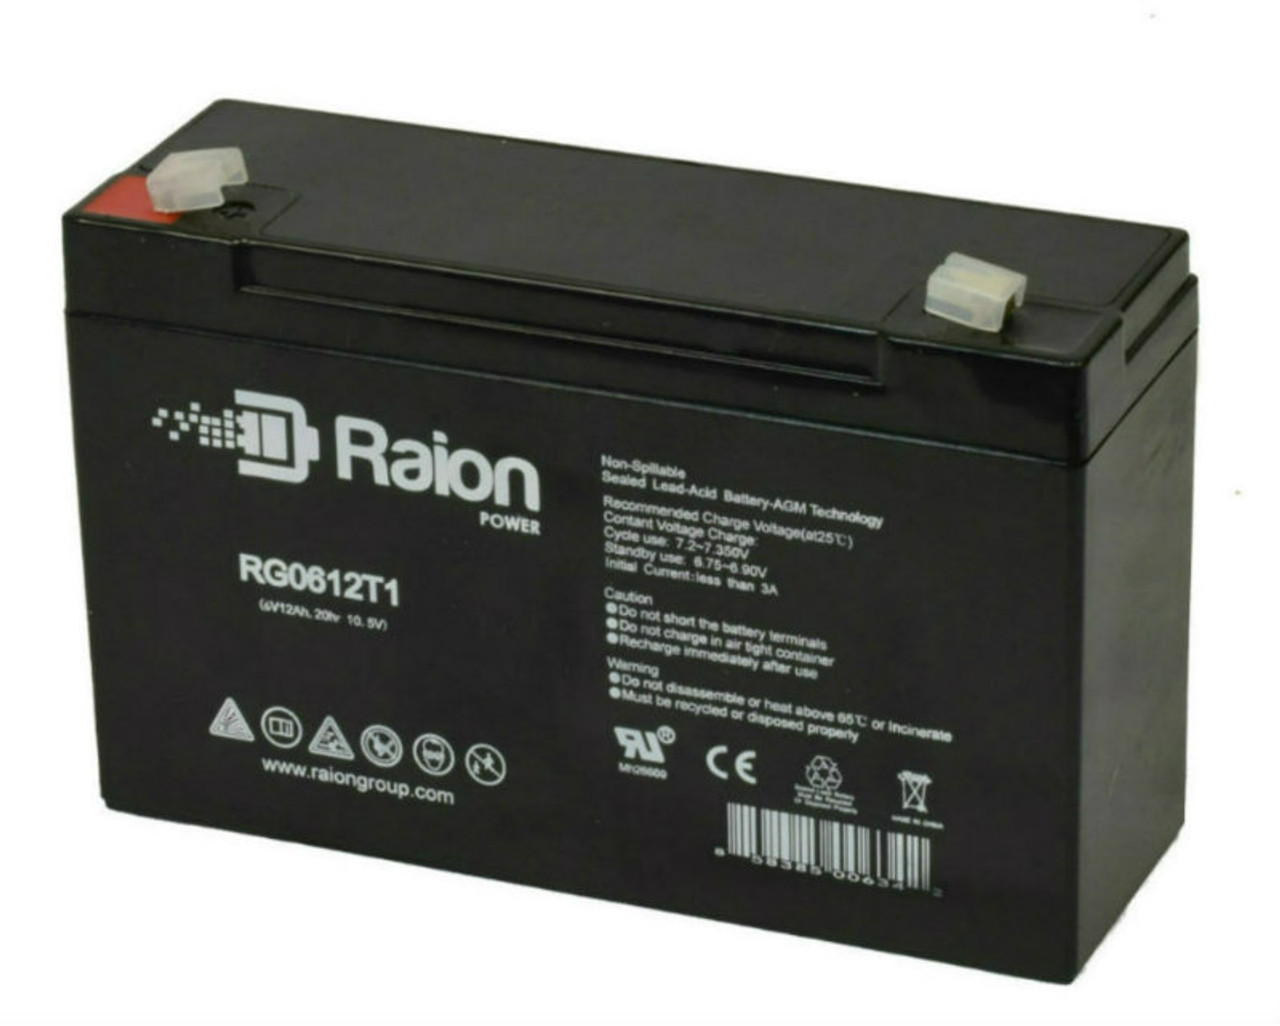 Raion Power RG06120T1 Replacement Battery for Volta VT610